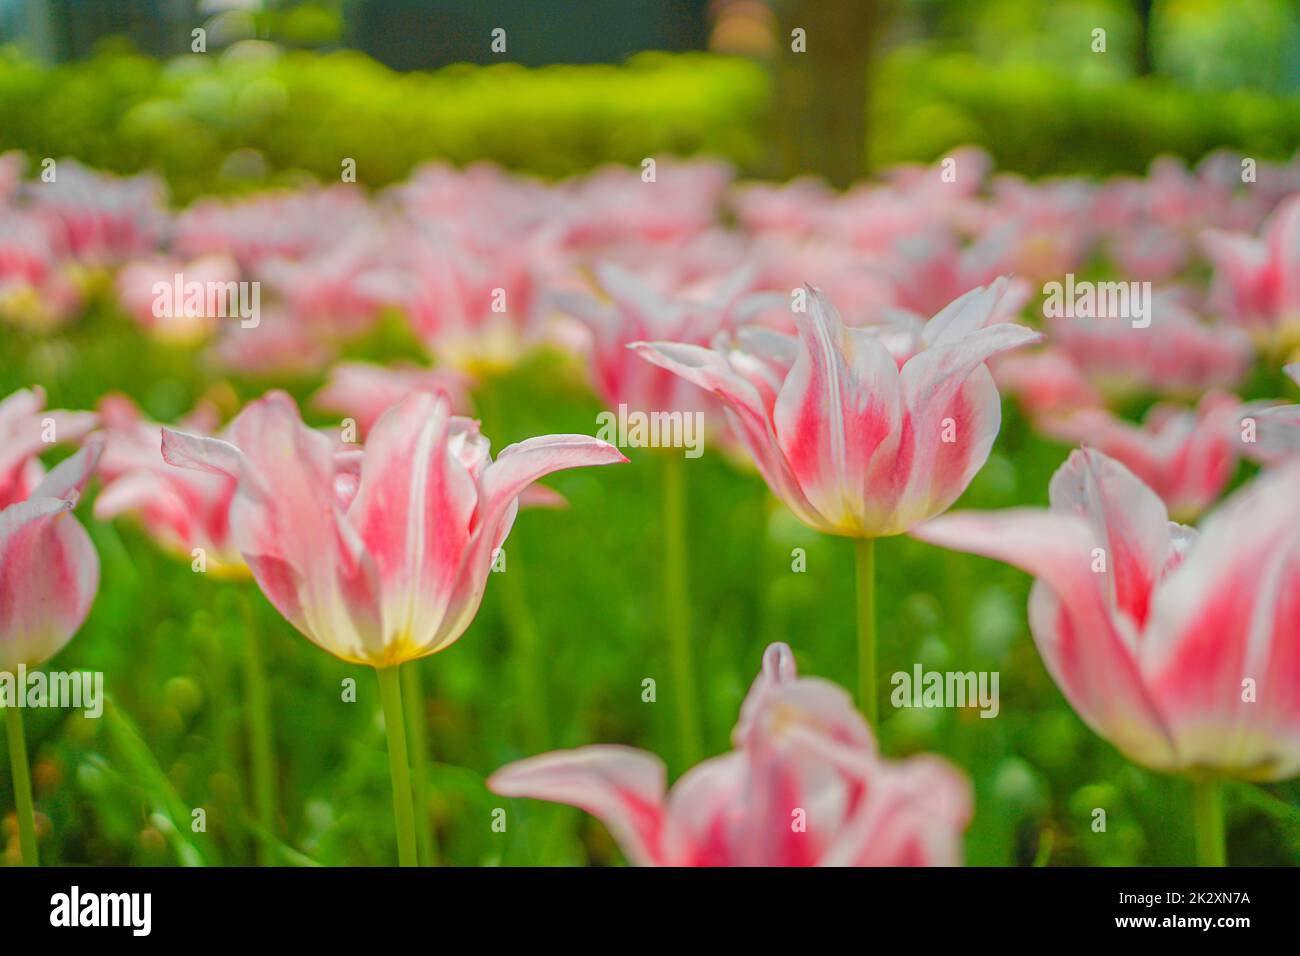 Lots of pink tulips Stock Photo